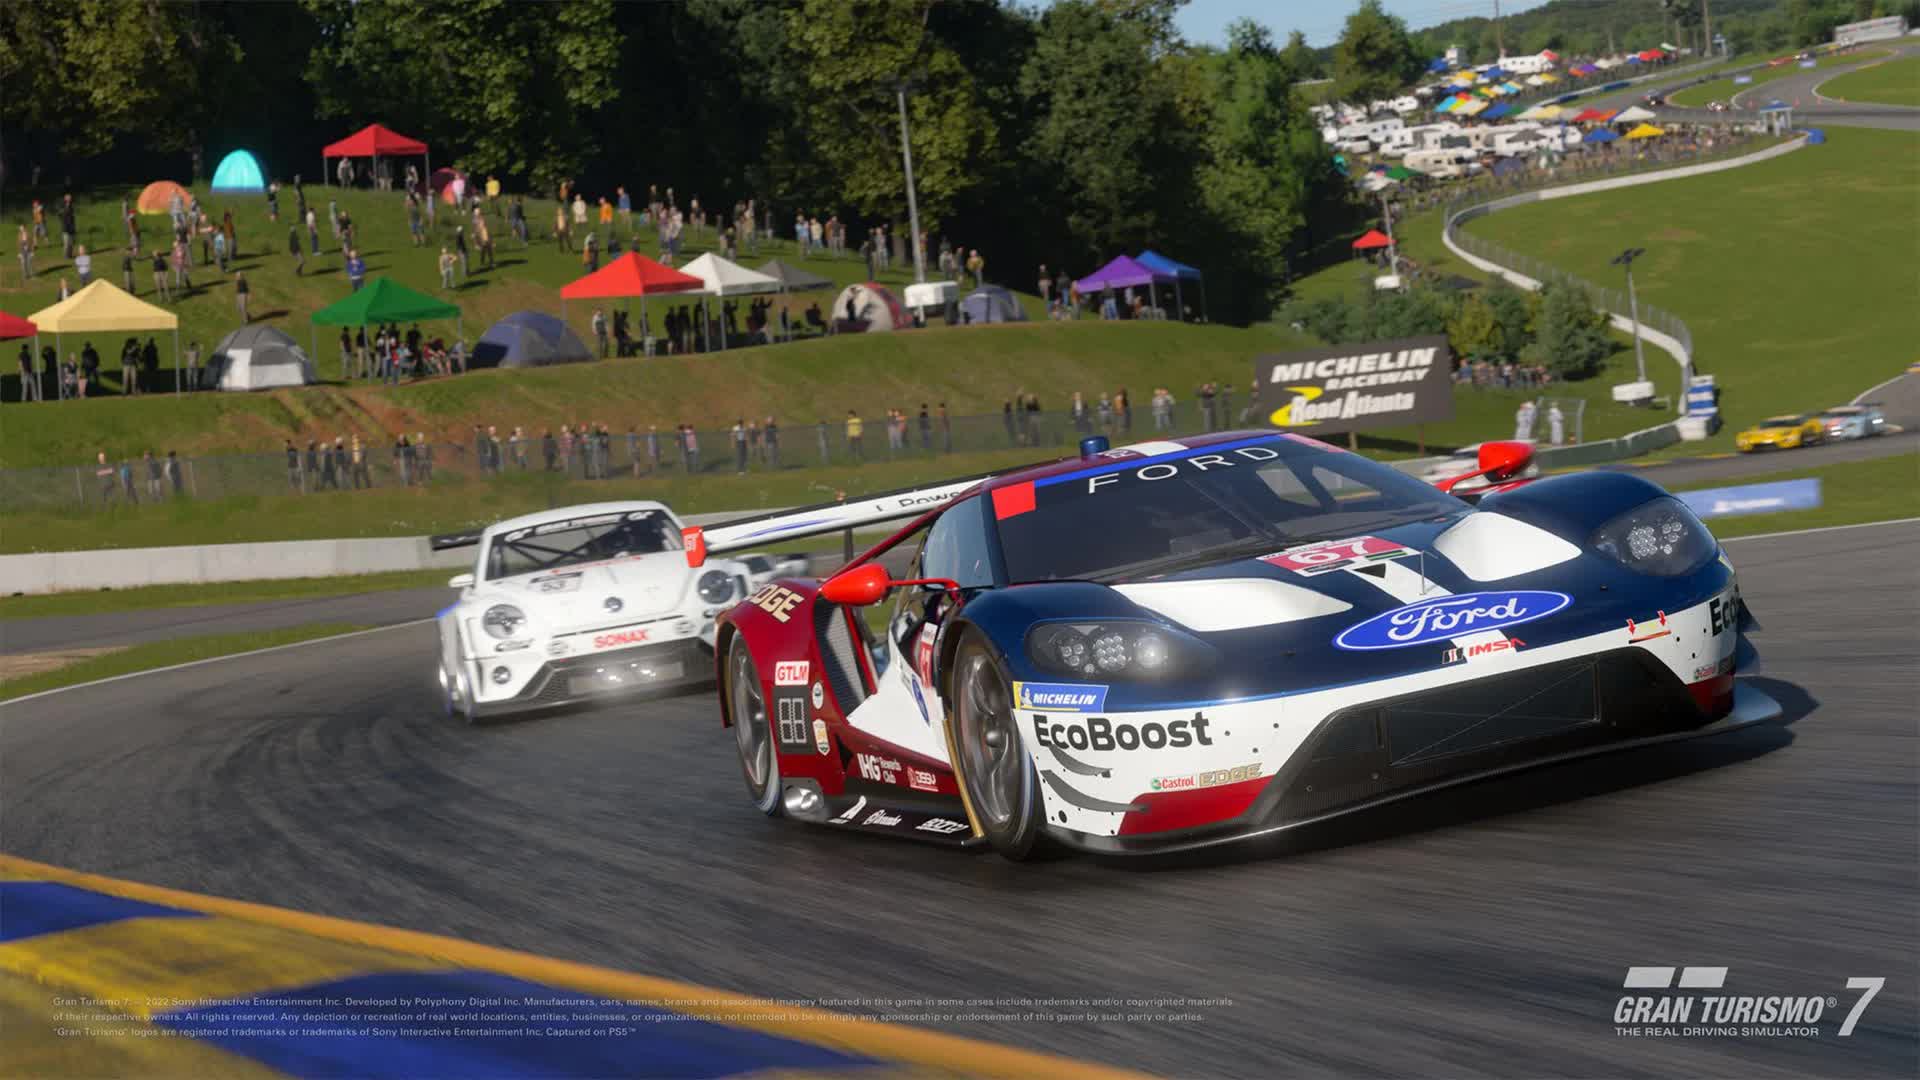 Gran Turismo creator says he is considering and looking into bringing the series to PC